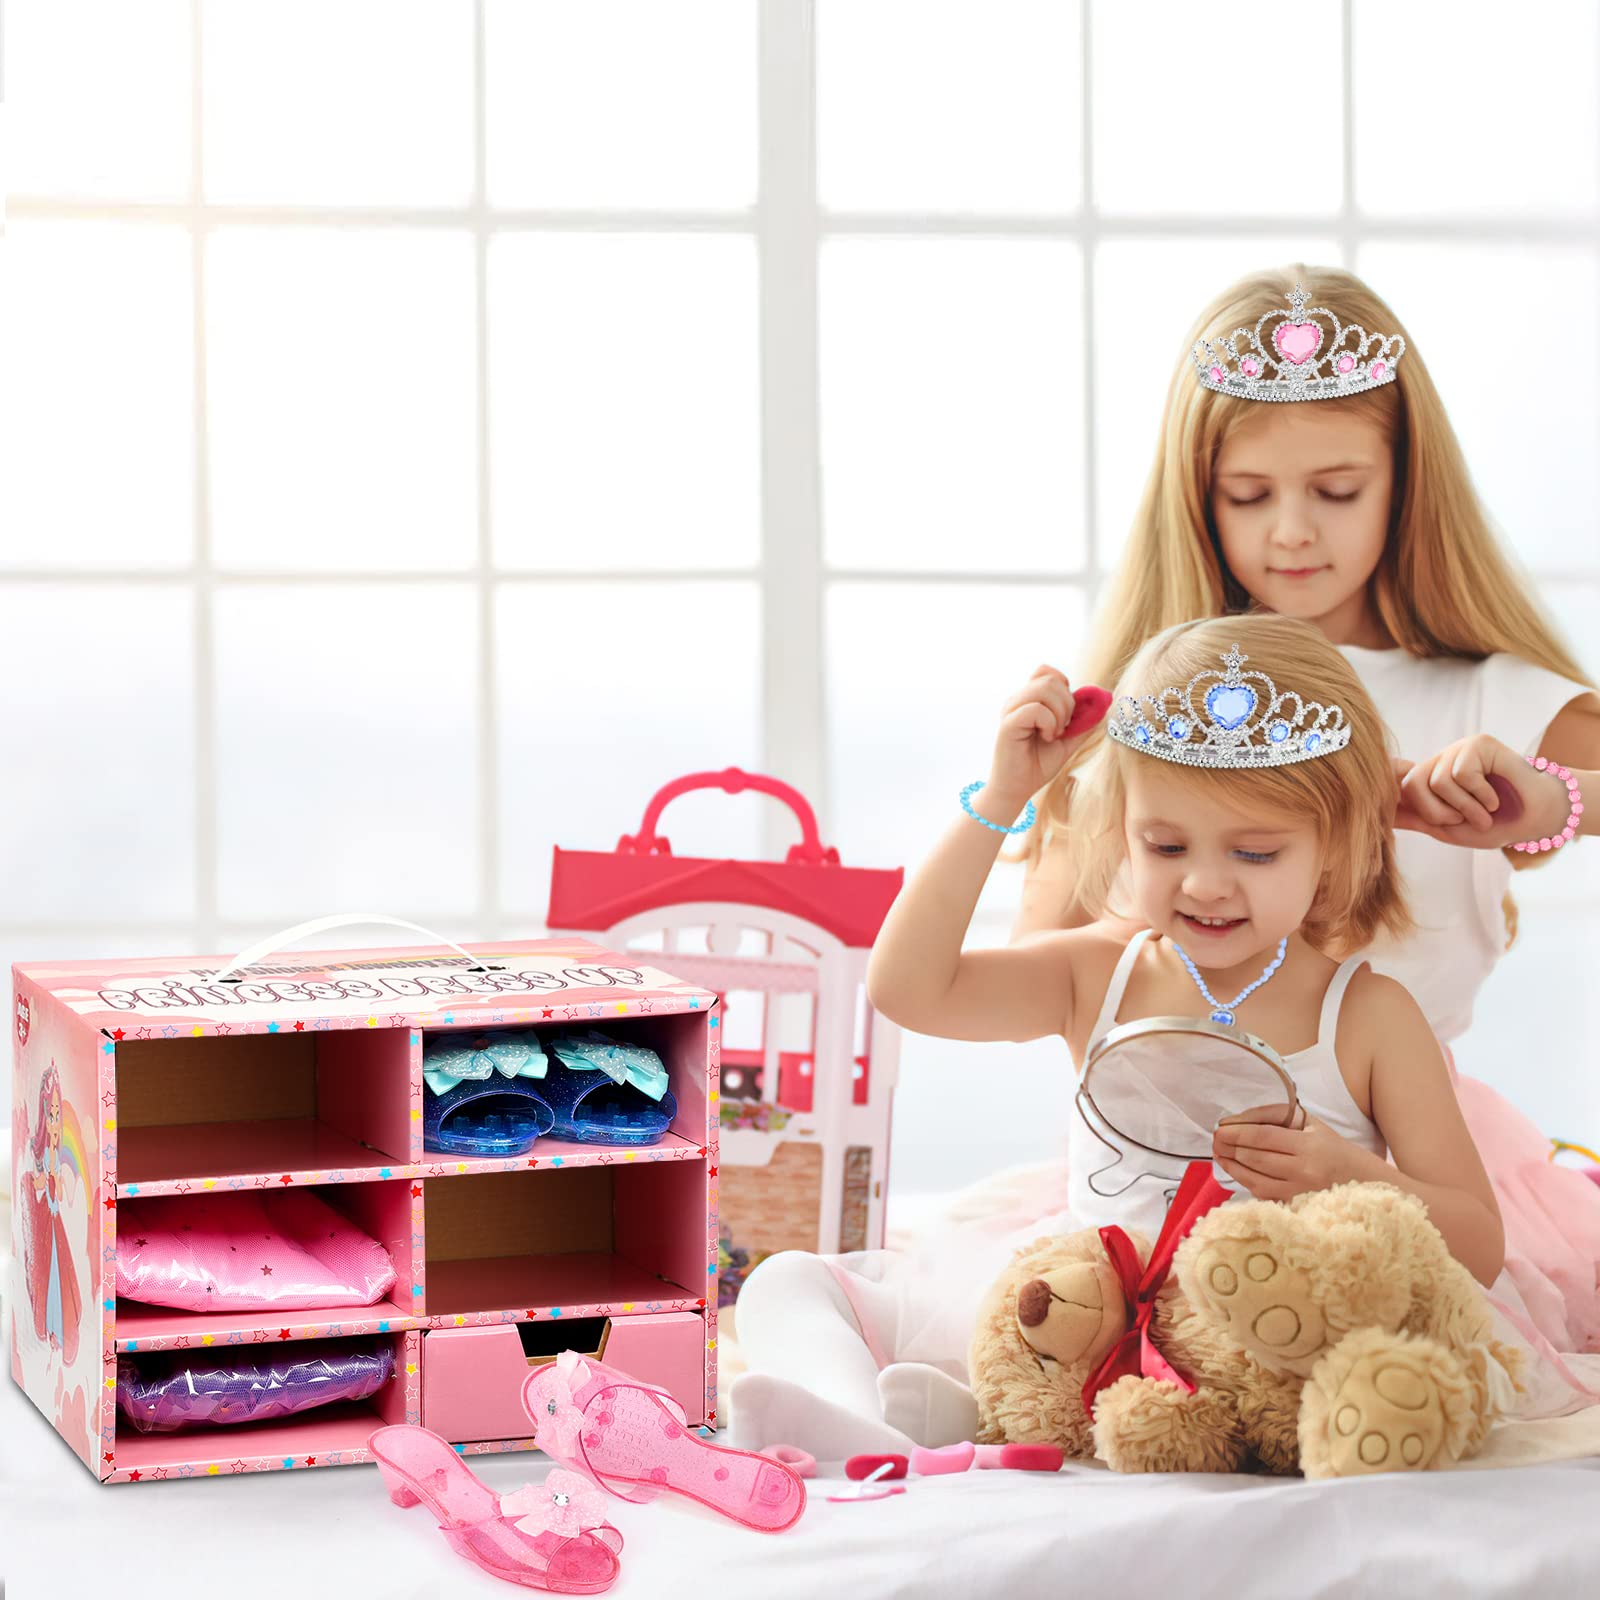 Princess Dress Up Clothes Jewelry Boutique, Pretend Play Toys w/ 3 Princess Dresses, Bracelets, Rings, Earrings, Crown, and Wand, Gifts for 3 4 5 Year Old Girls